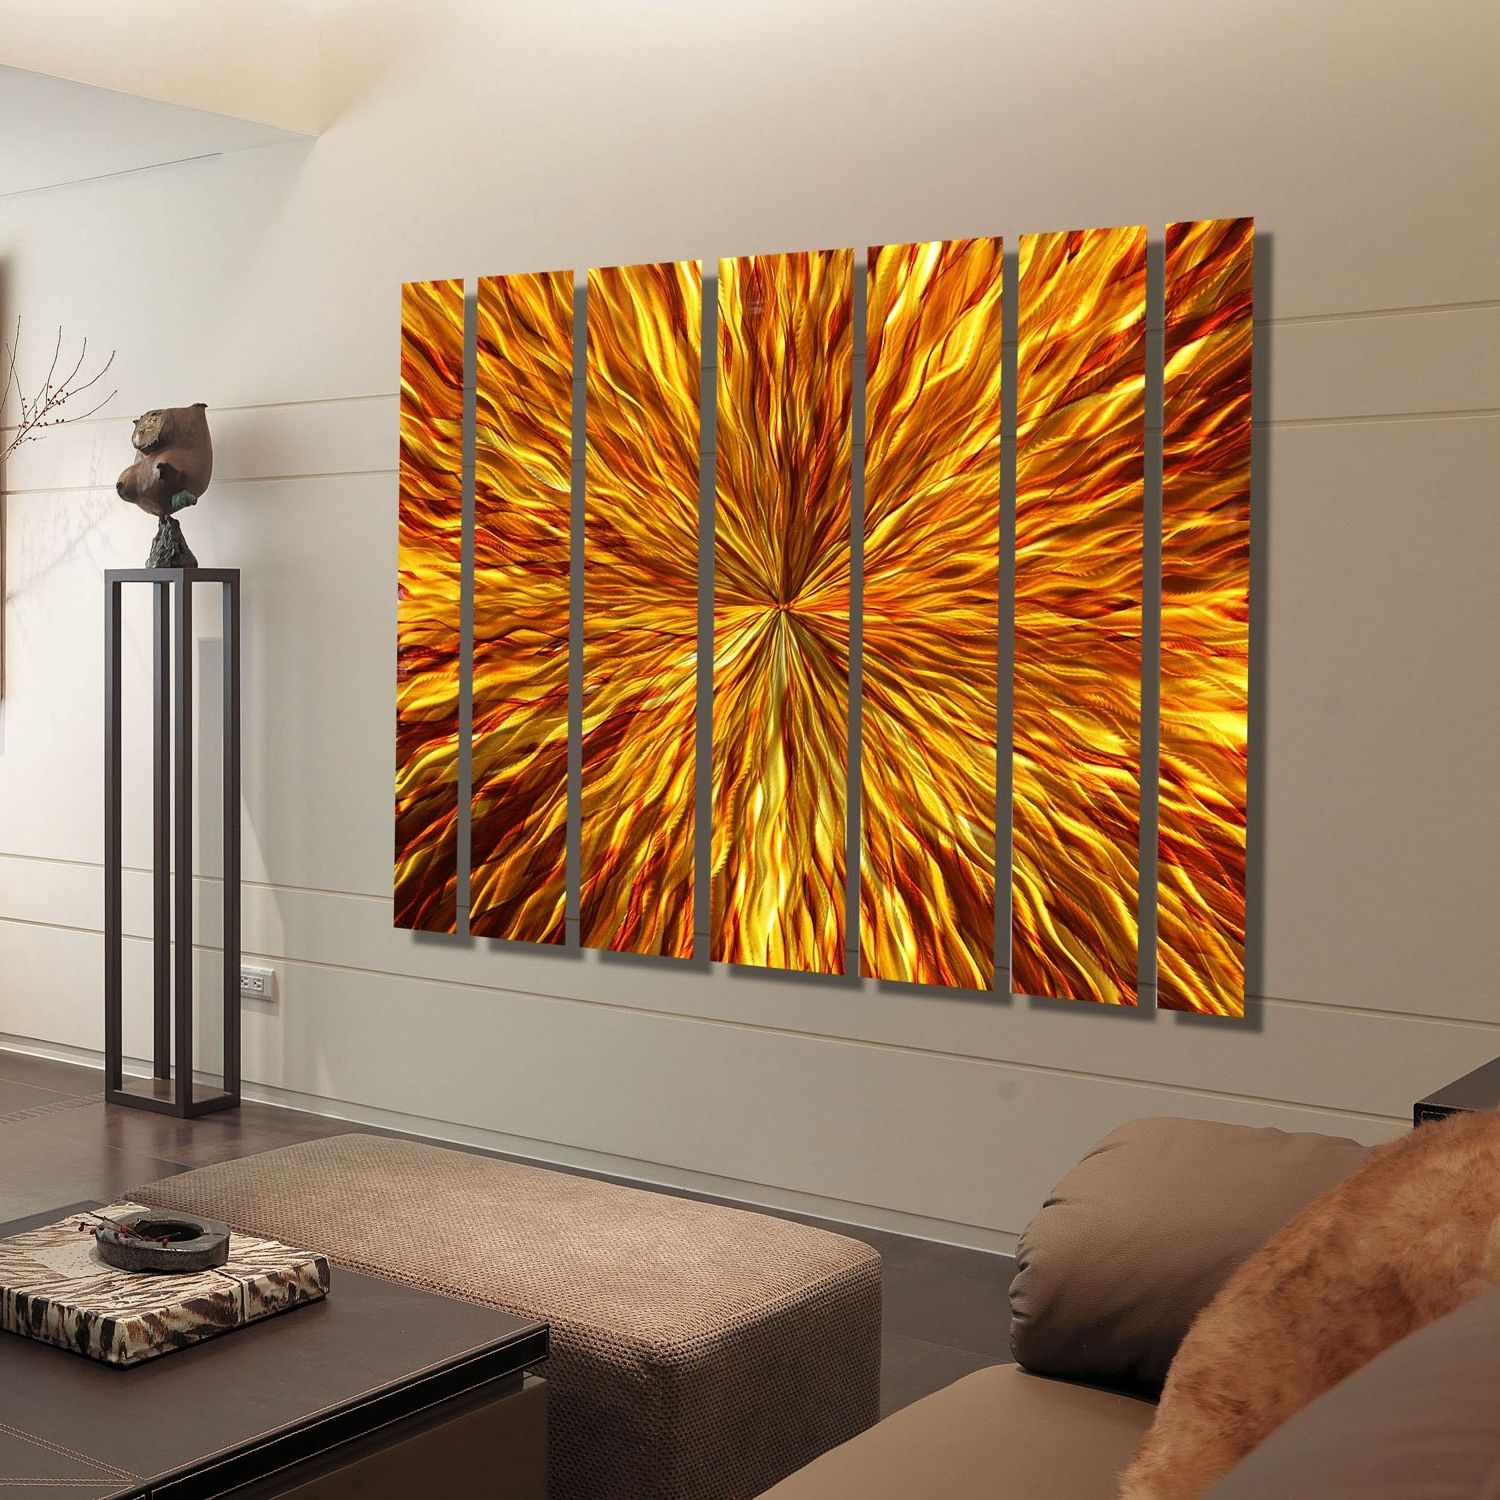 Top 15 of Large Abstract Metal Wall Art